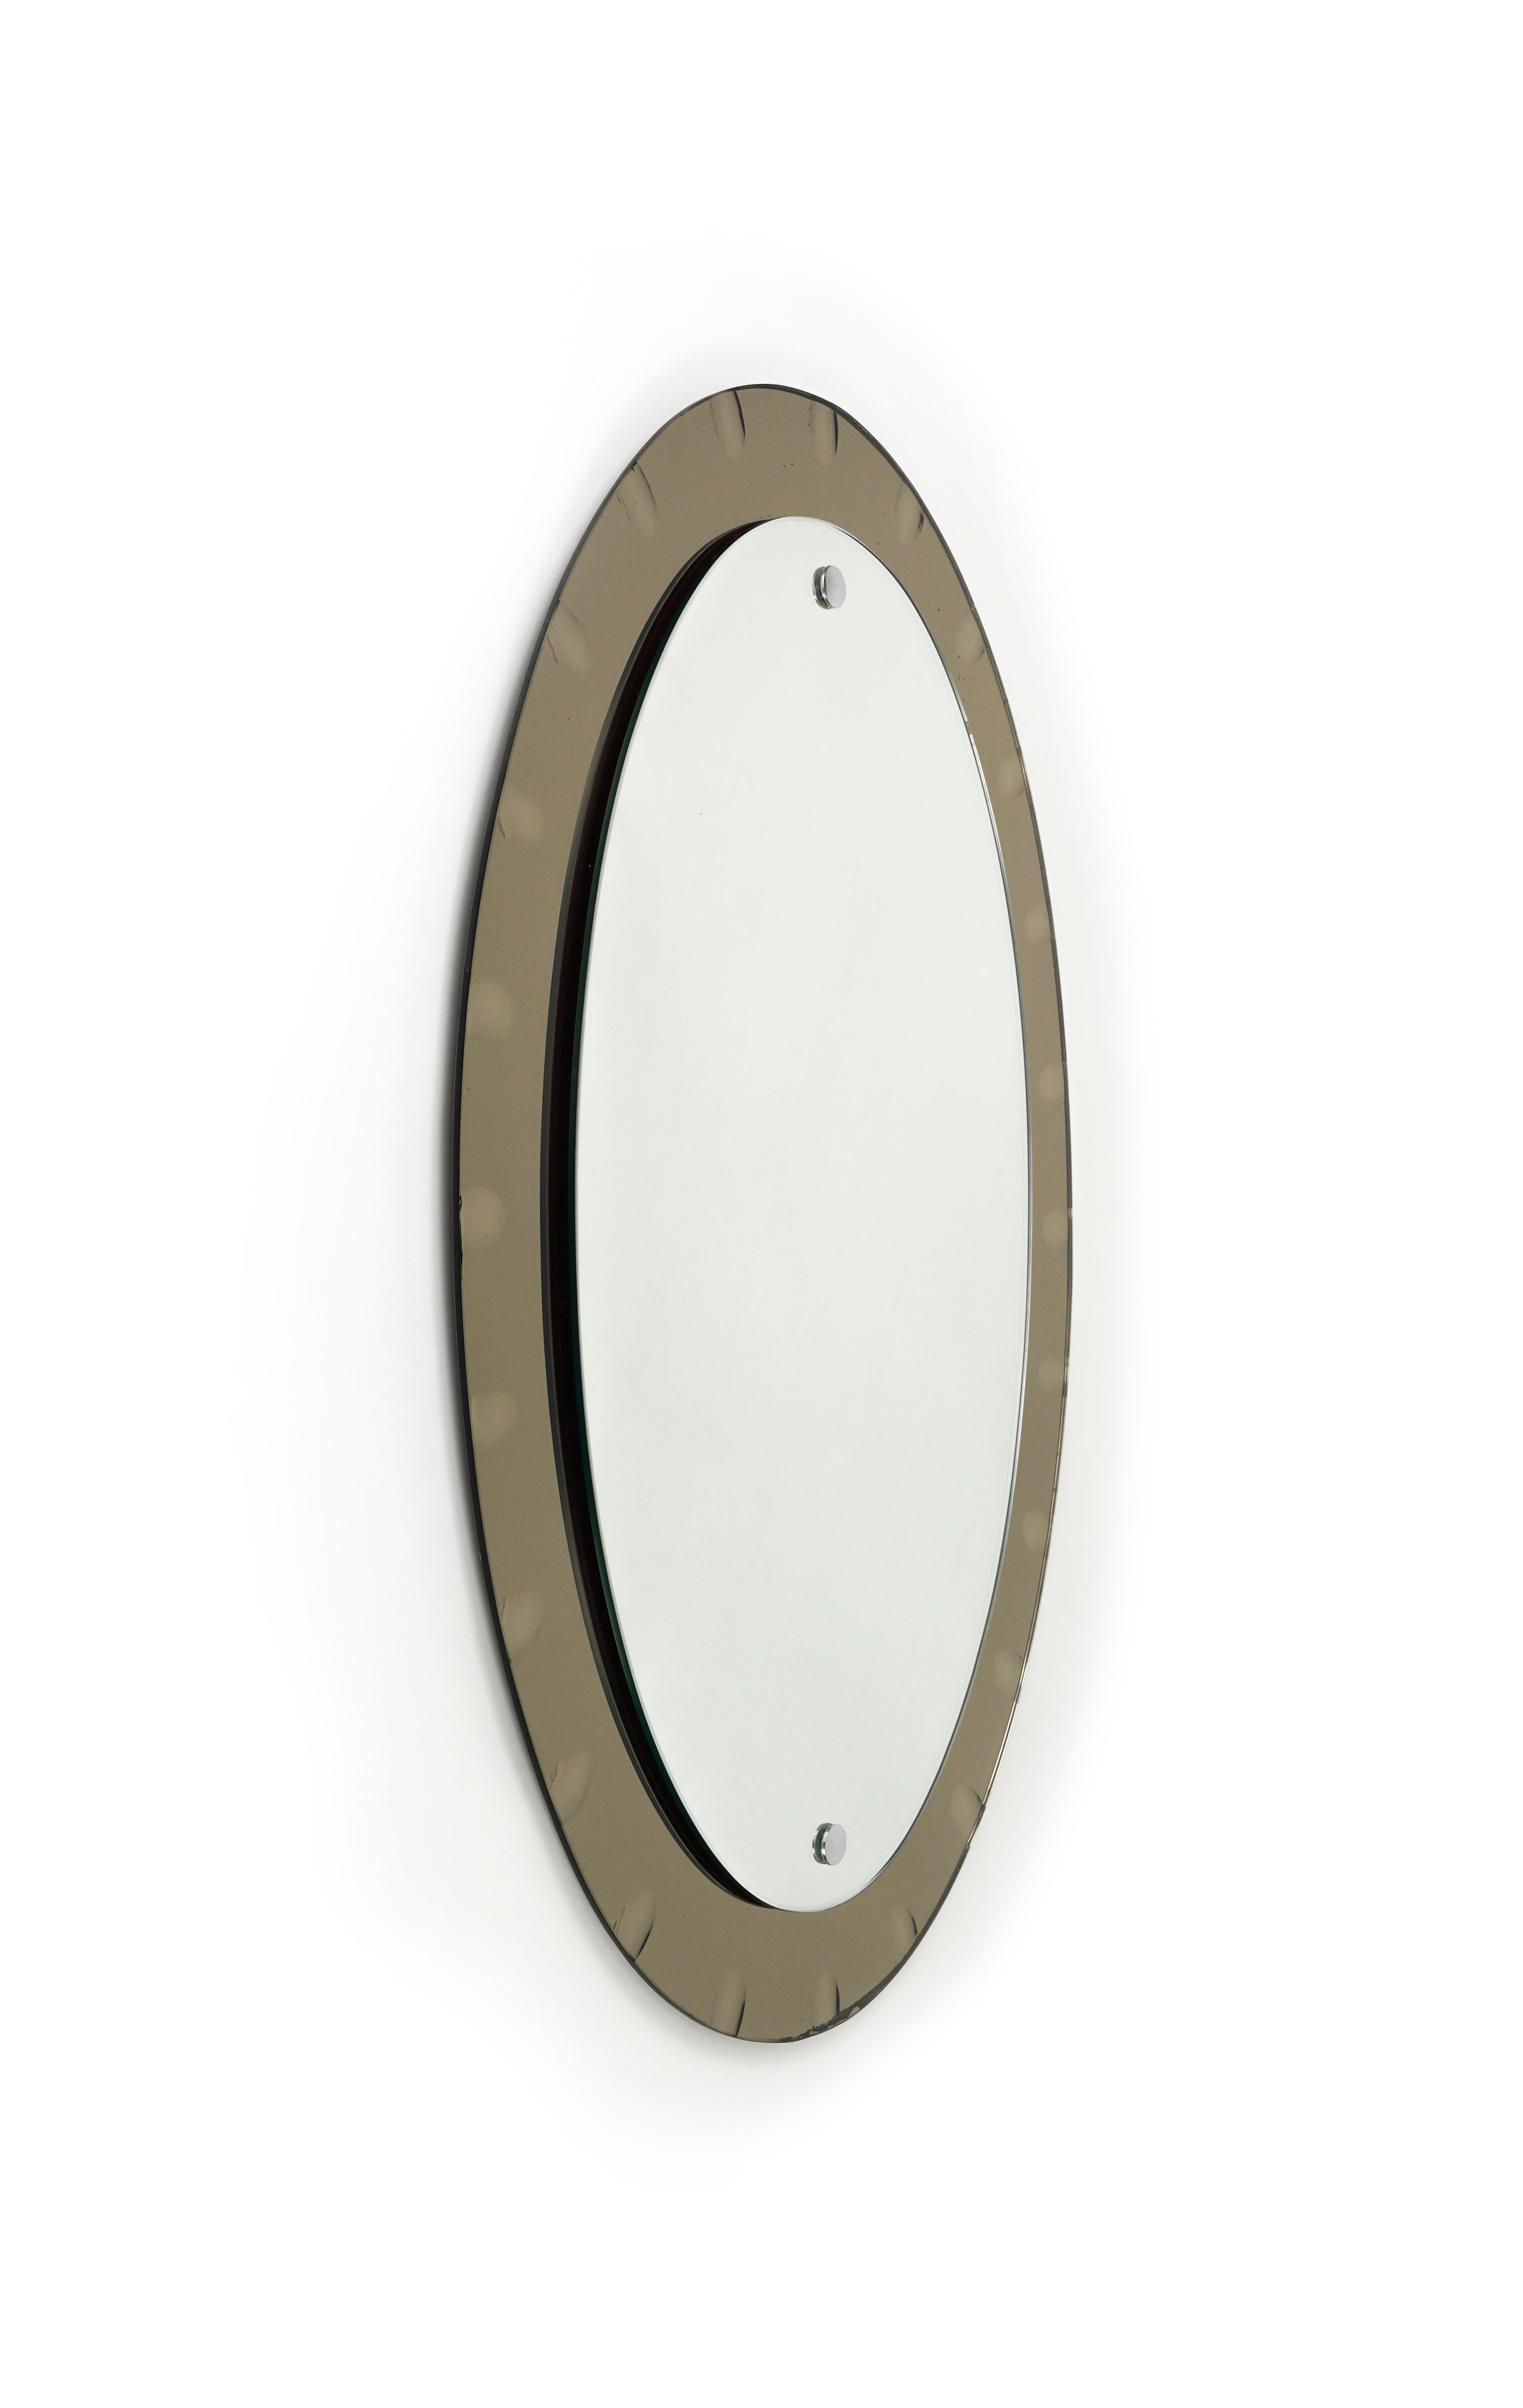 Midcentury Oval Wall Mirror with Bronzed Frame by Cristal Arte, Italy 1960s In Good Condition For Sale In Rome, IT